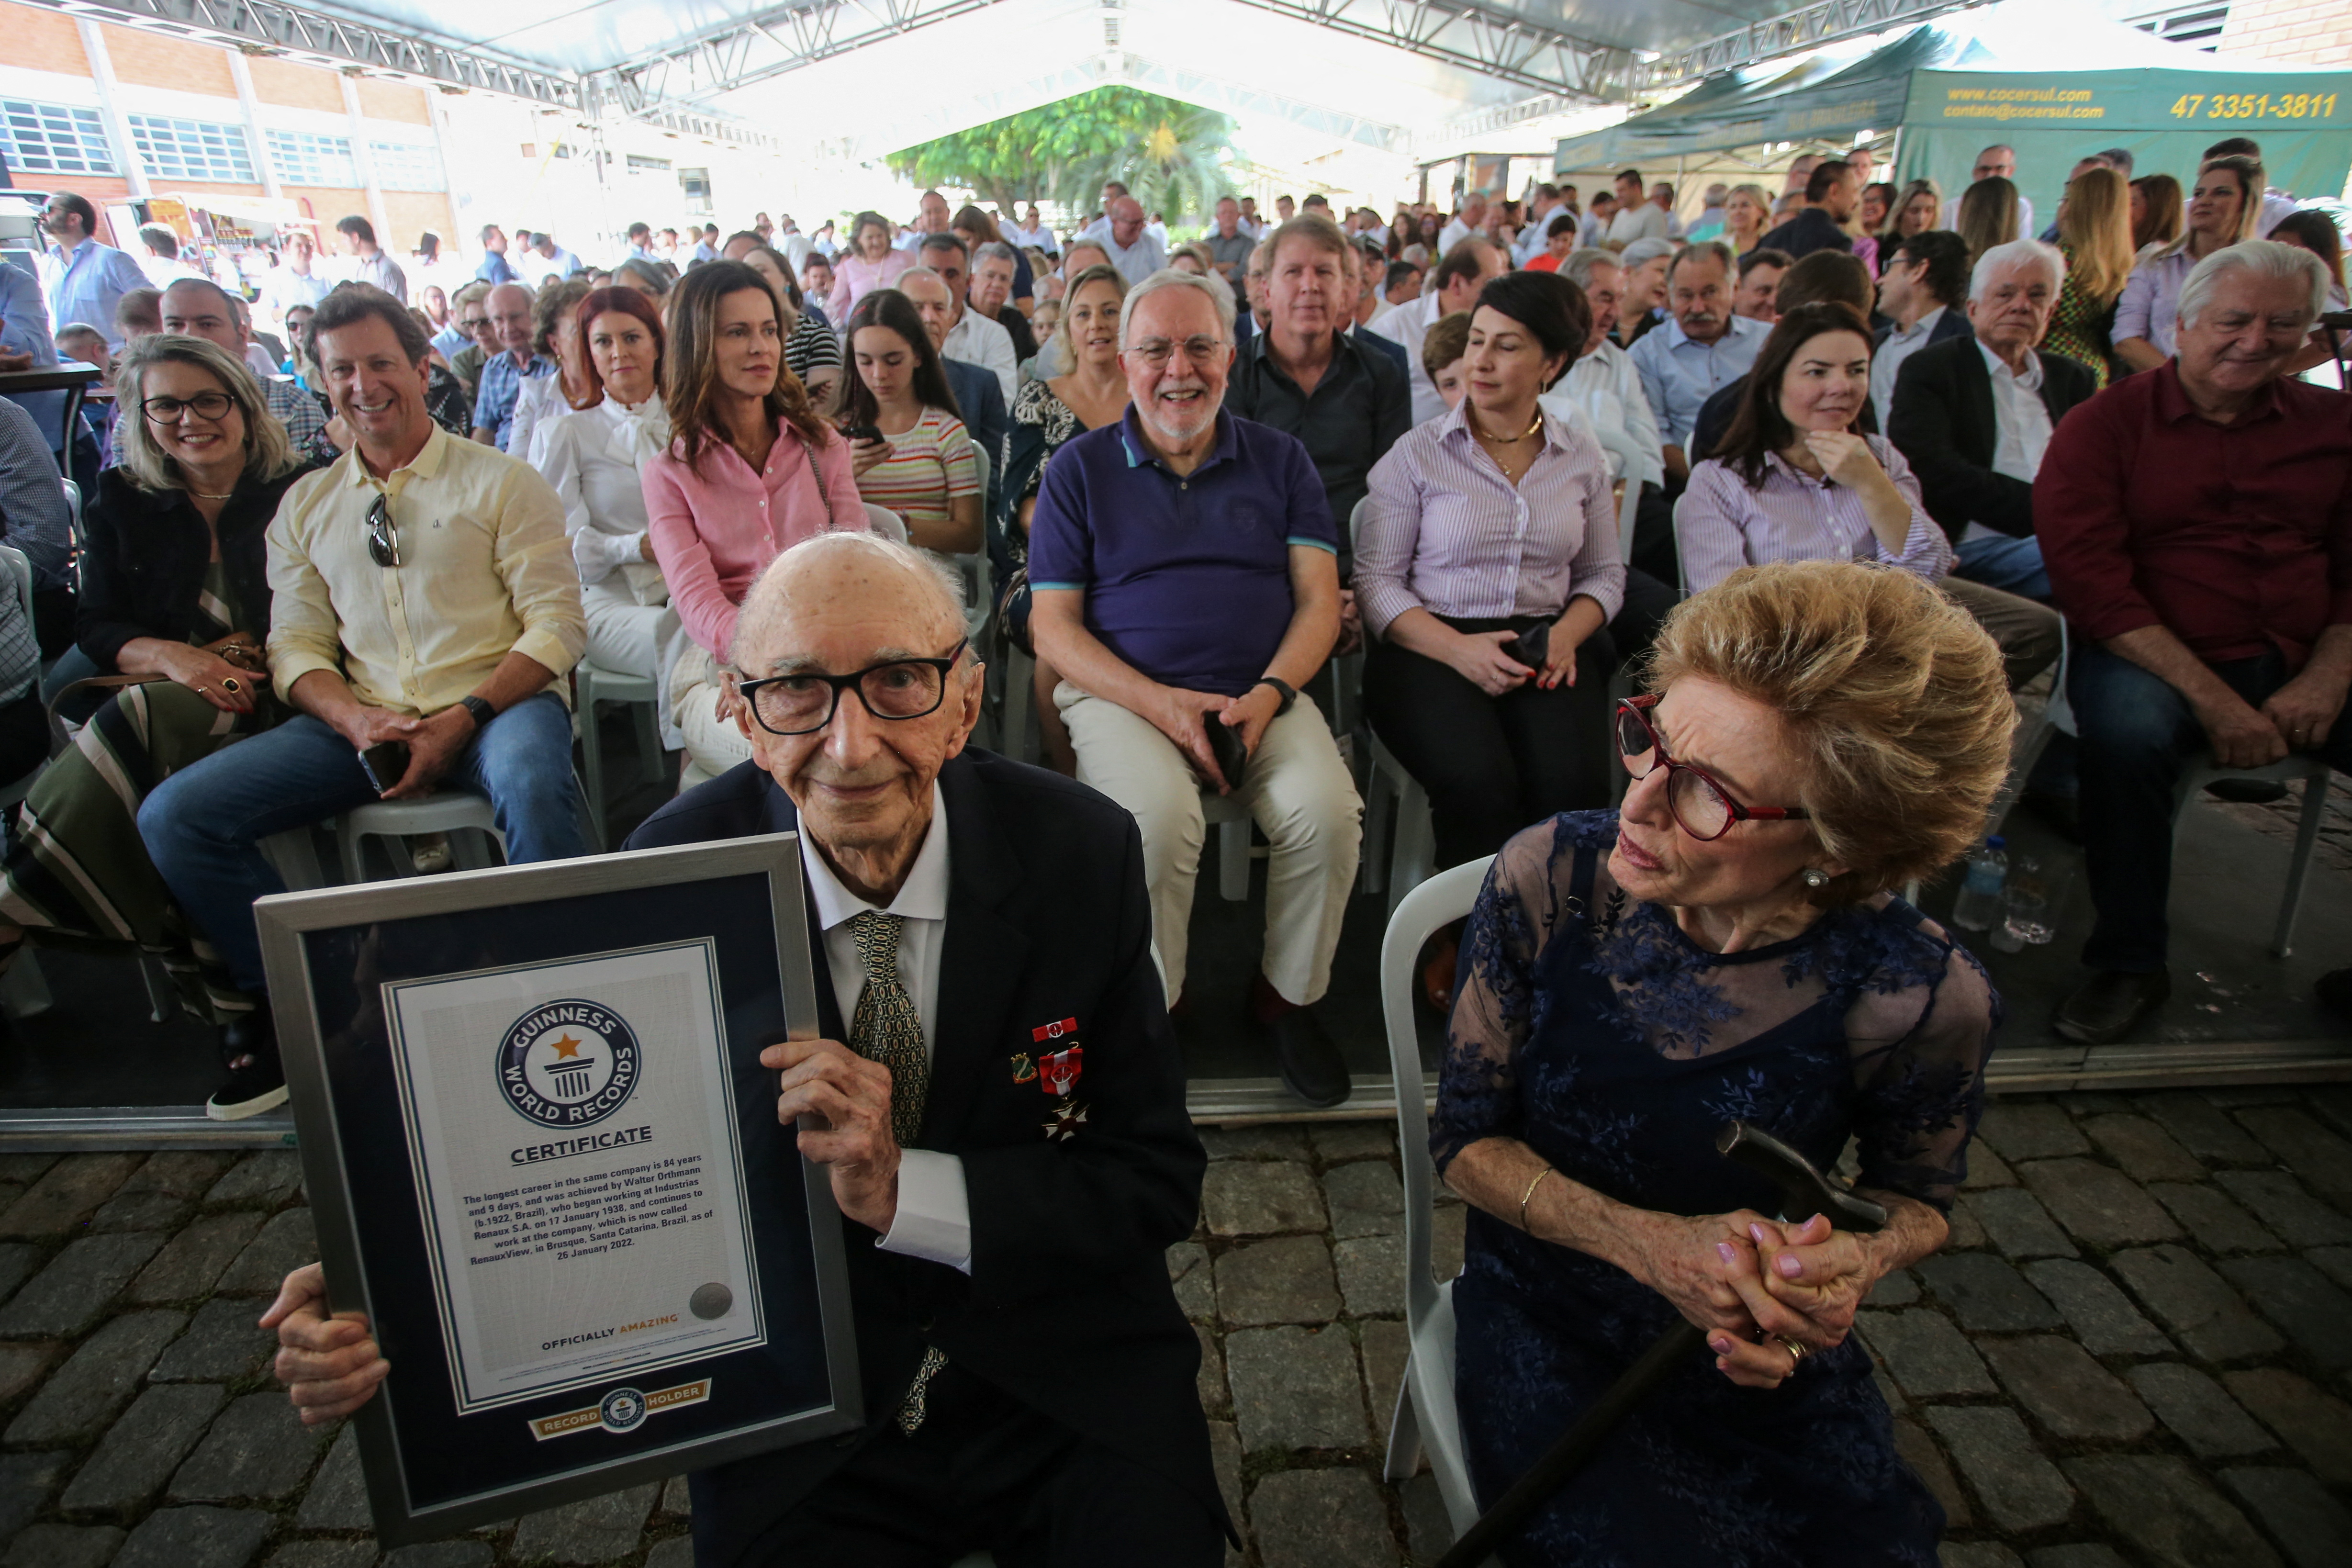 Guinness record: 84 years working for the same company